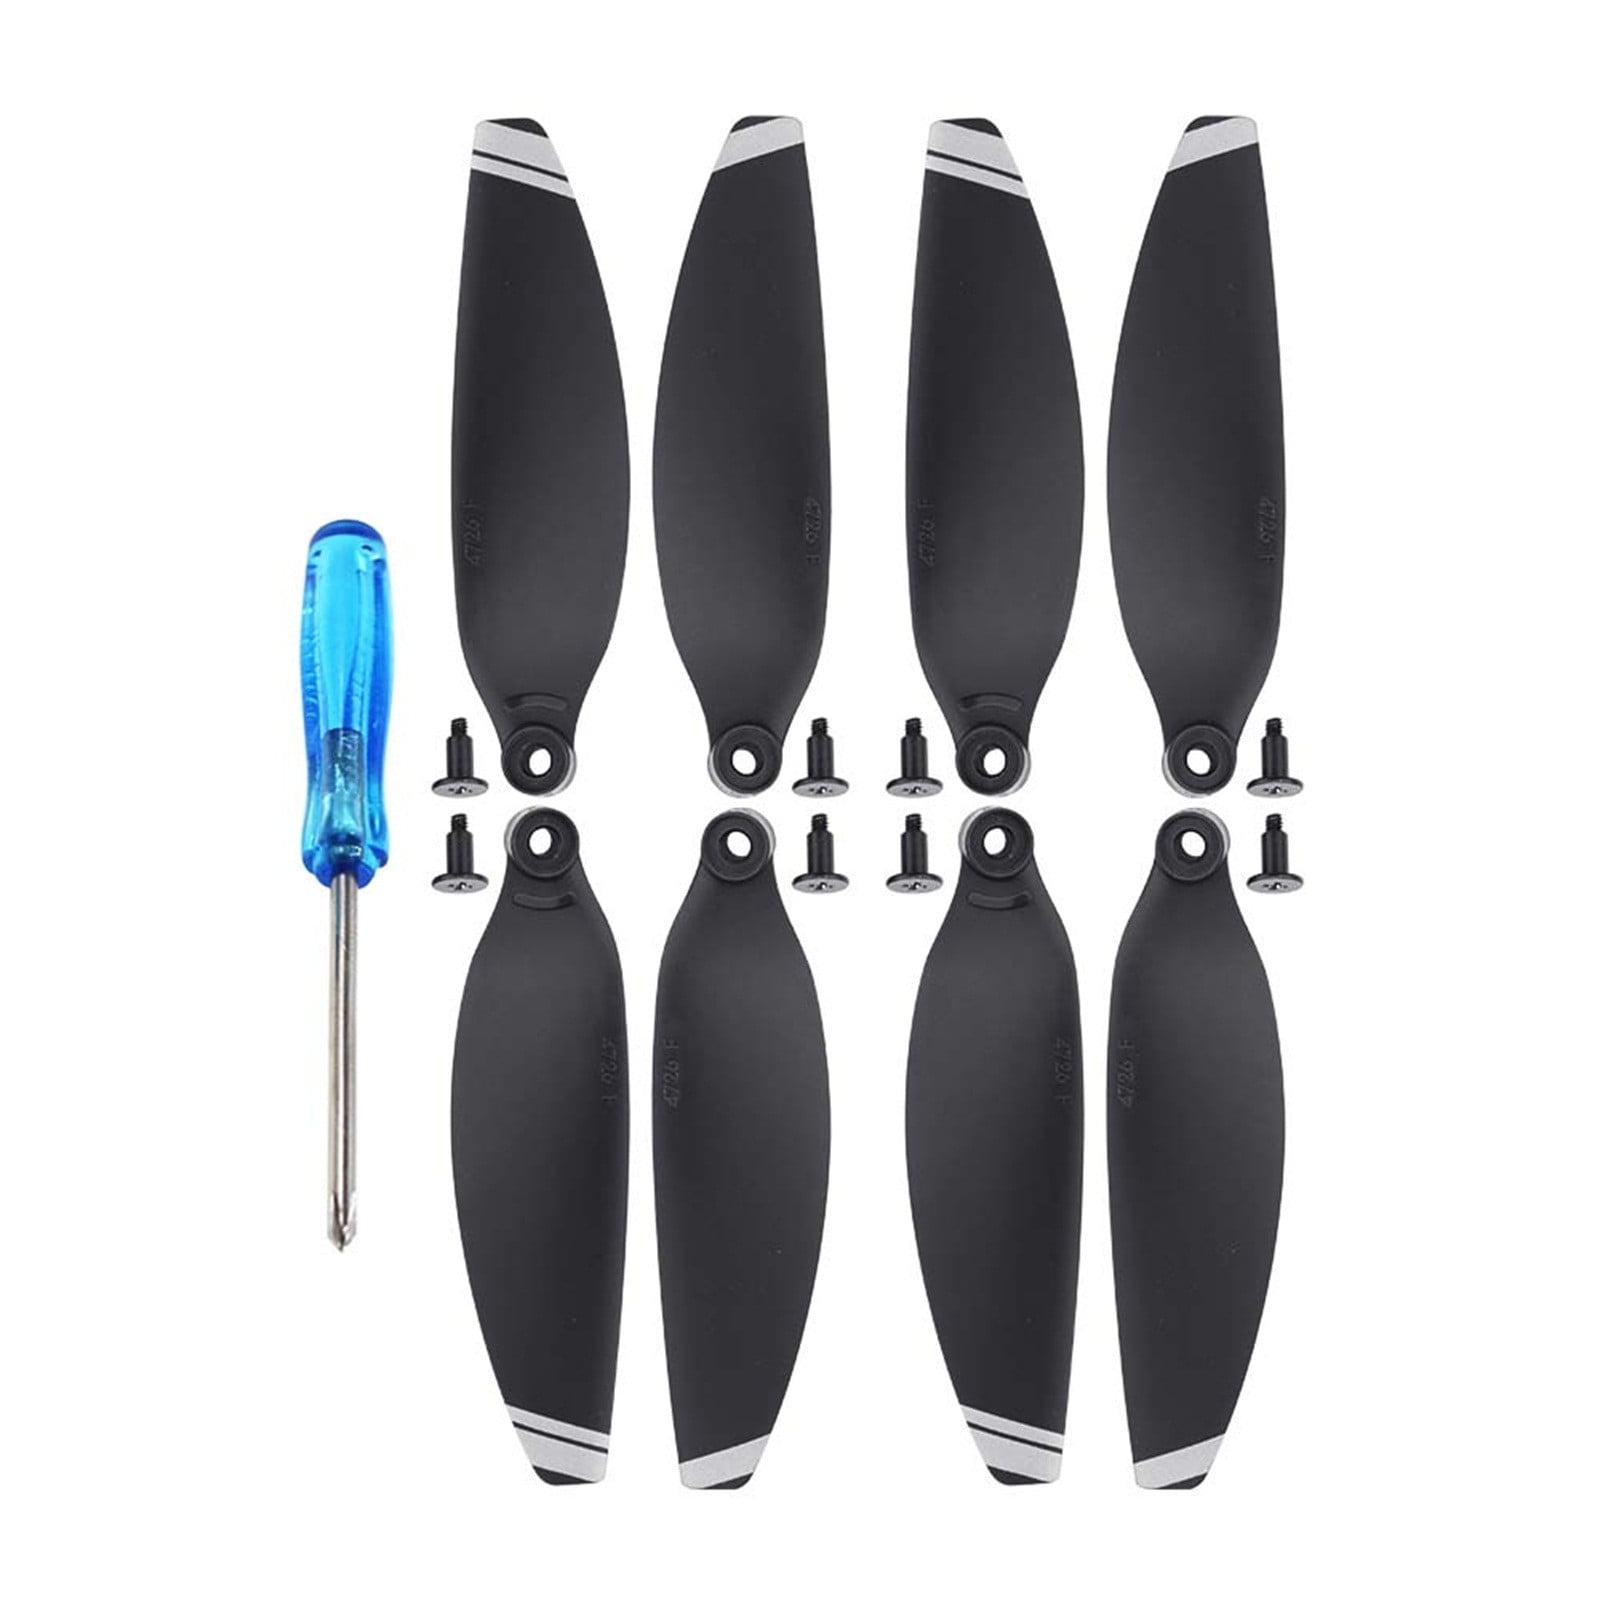 10x Propellers For Yuneec Q500 Q500M 4K Typhoon Drone Quick Release Props 